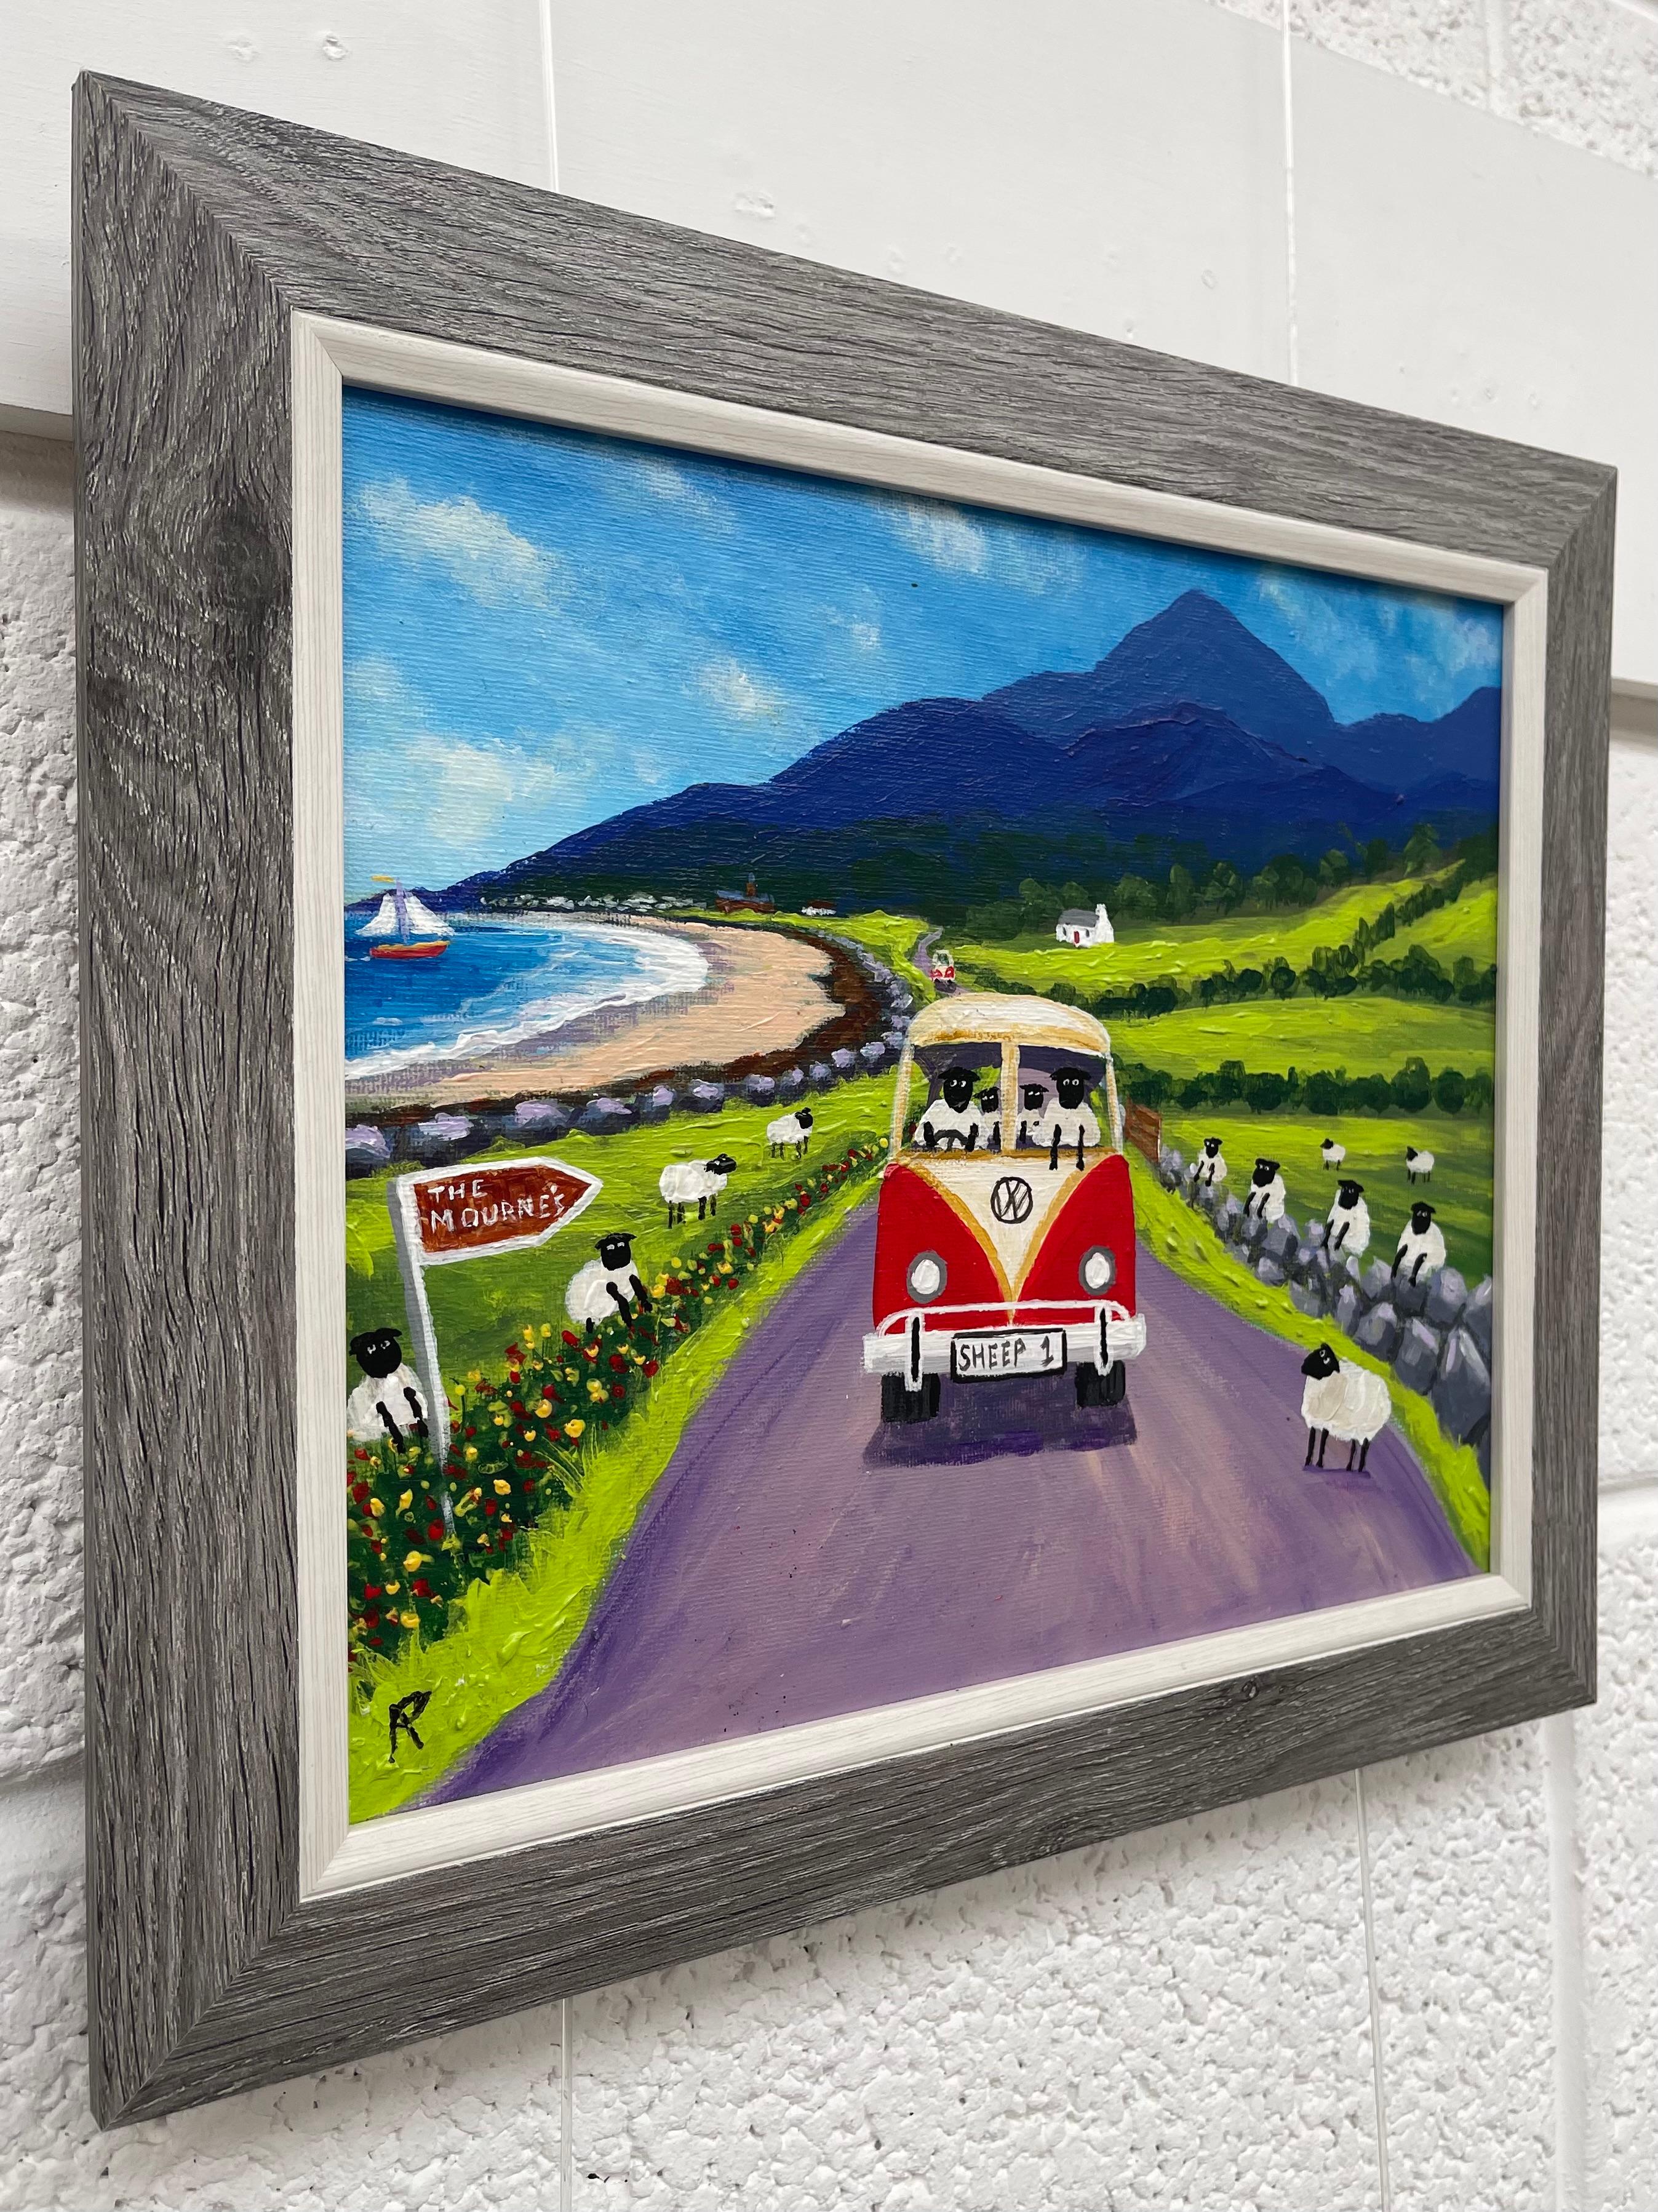 Sheep in a VW Split Screen Camper Van with Beach Mountain Scene in Ireland - Painting by Andy Pat